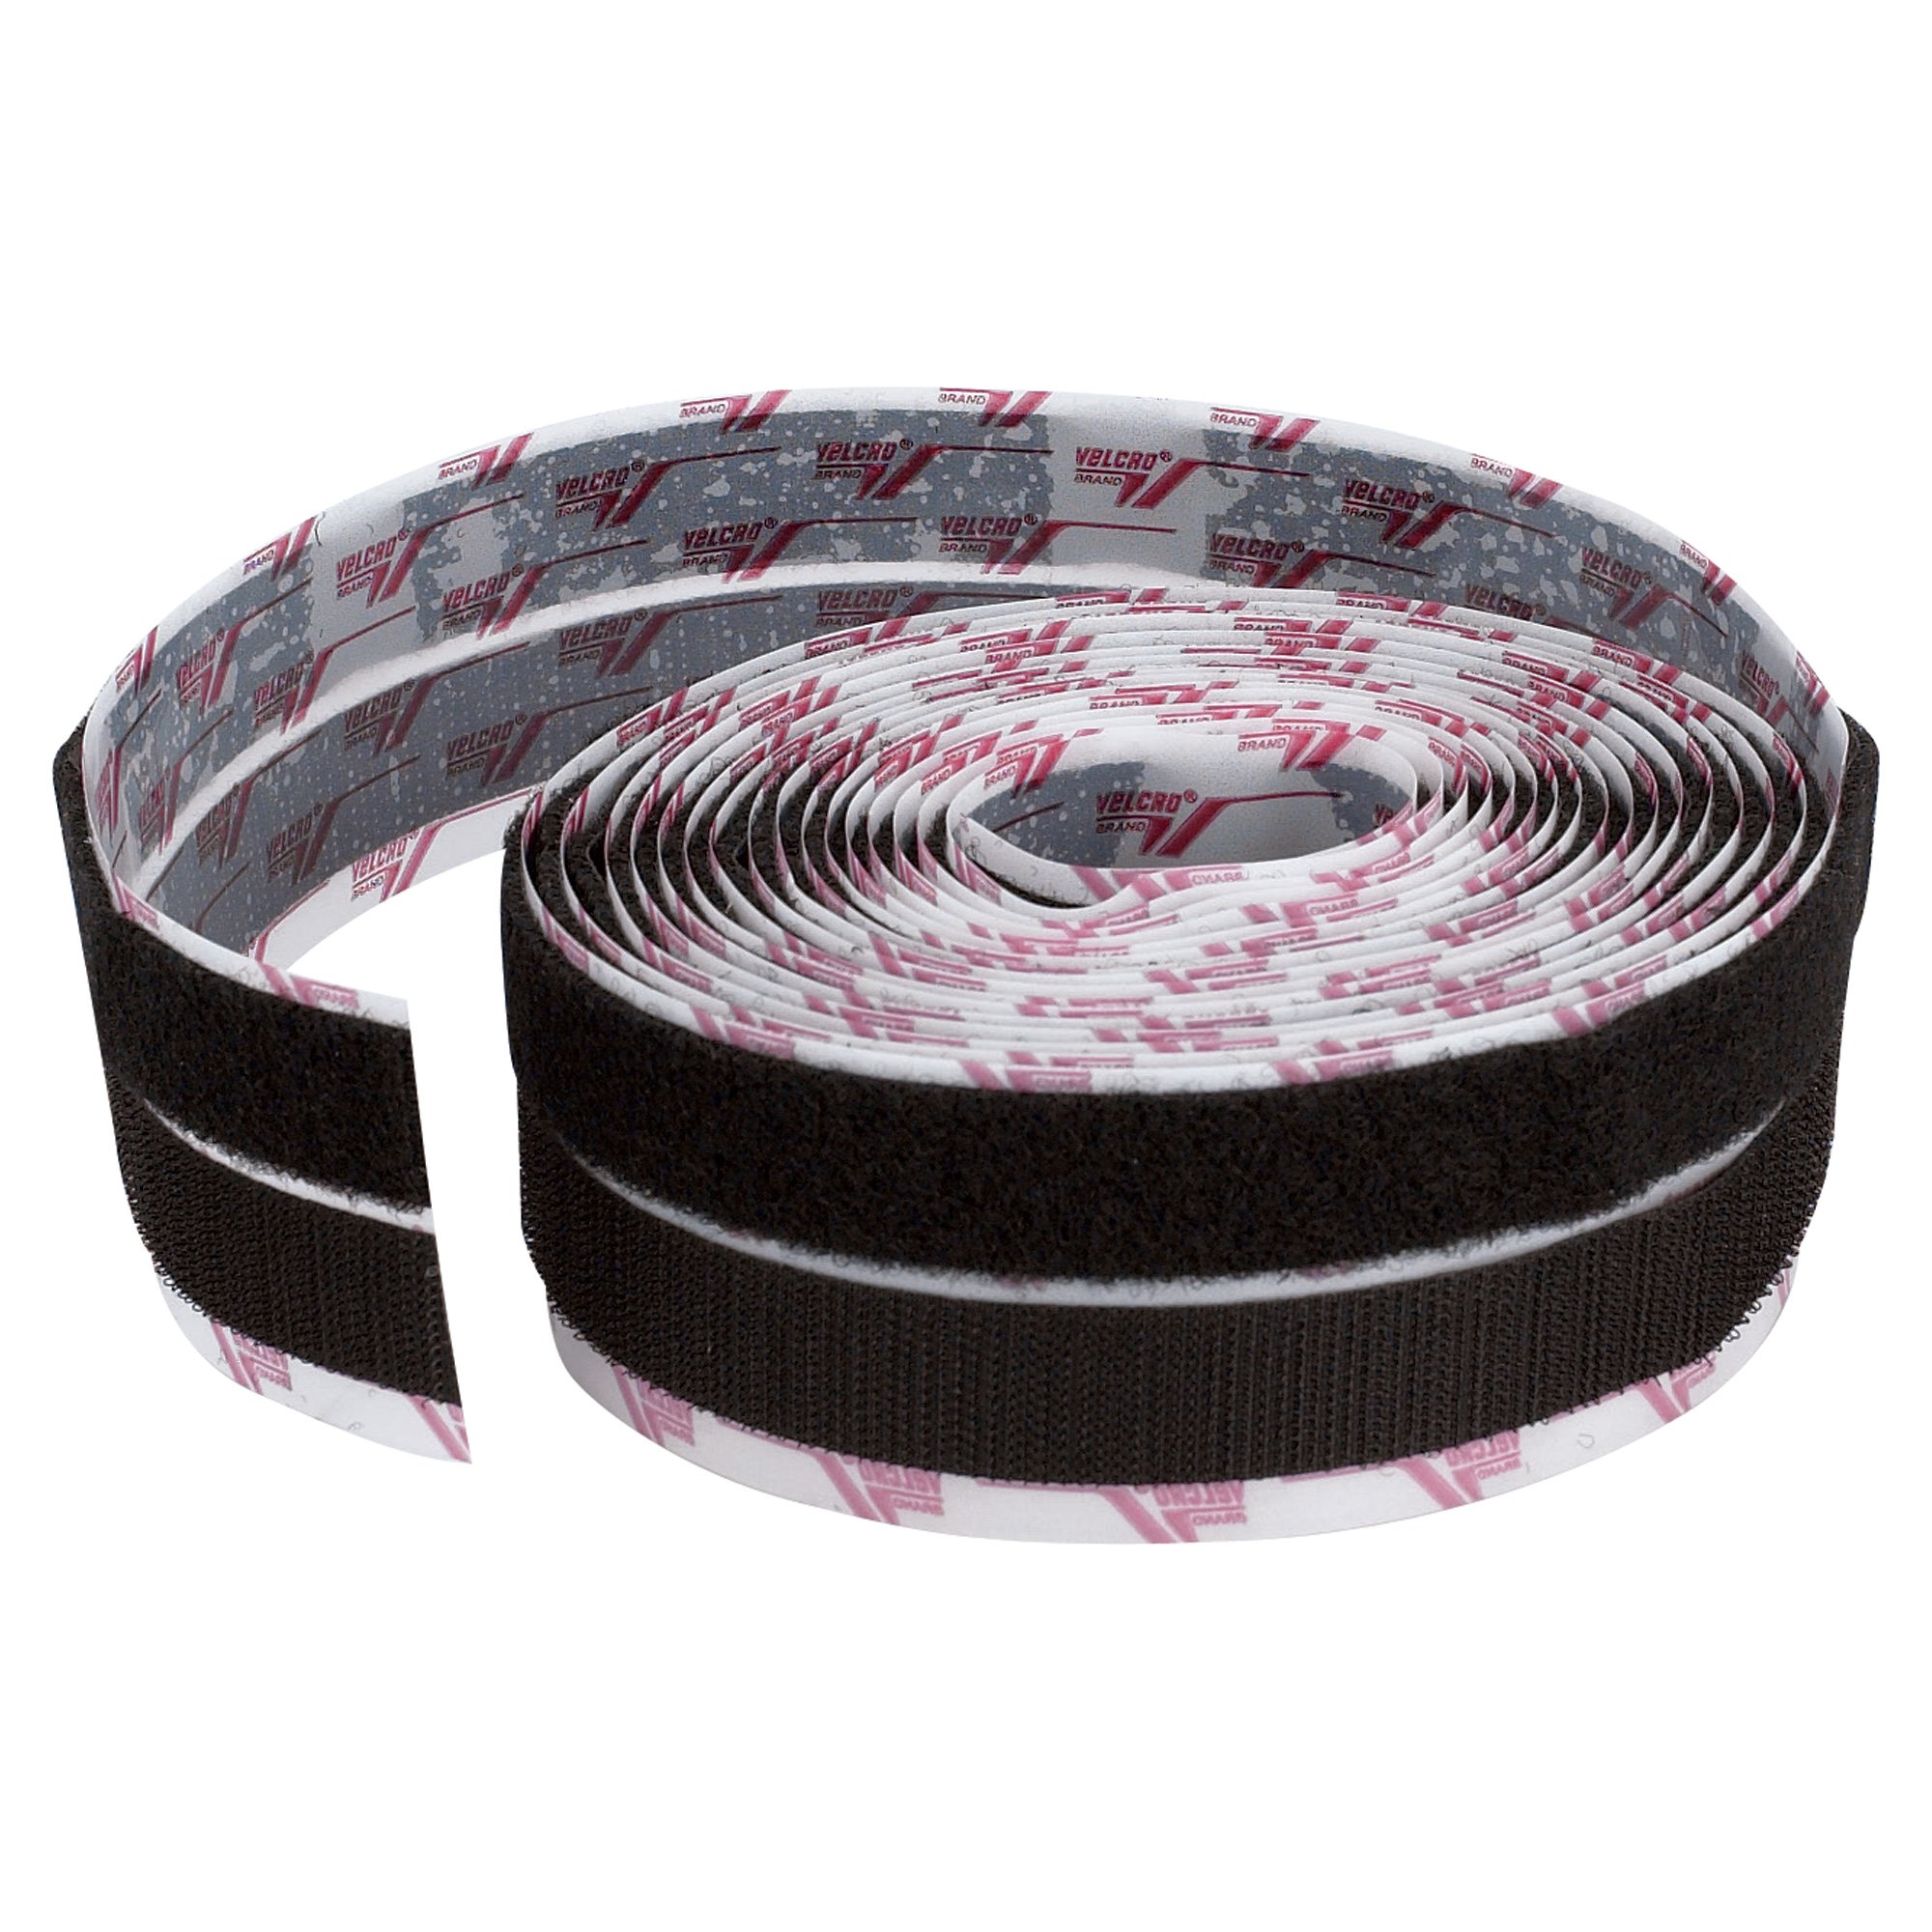 4 Wide Velcro Strips (Hook & Loop) Sticky Back - Sold By The Foot